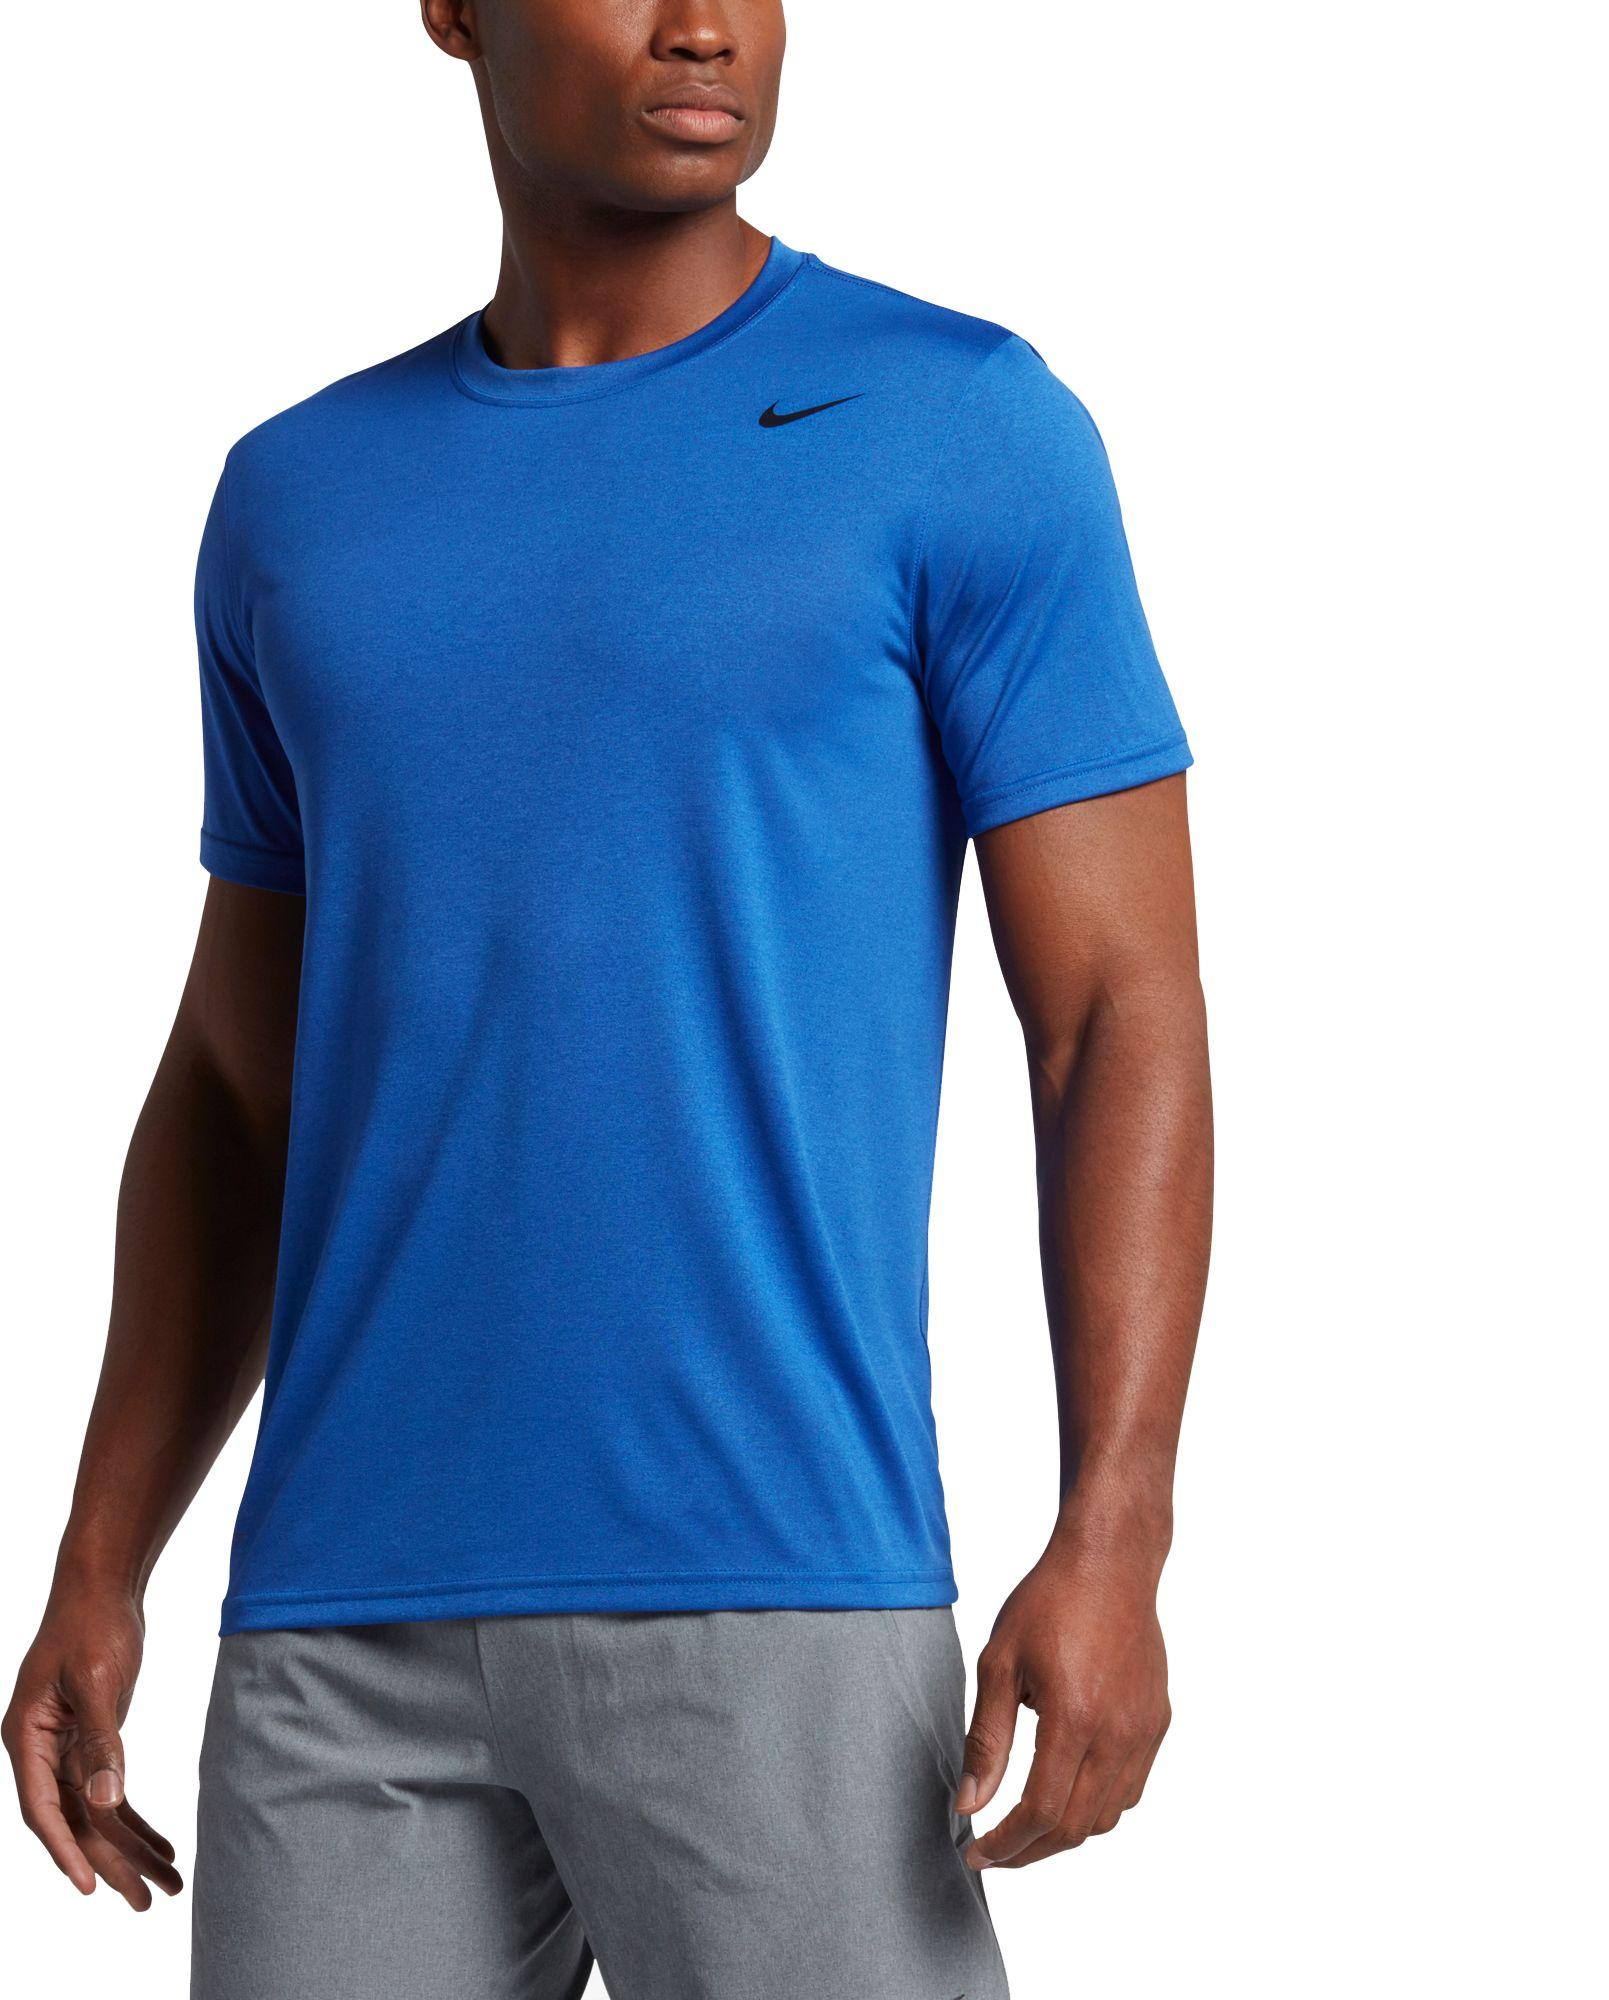 Nike Synthetic Legend 2.0 Training T-shirt in Blue for Men - Lyst